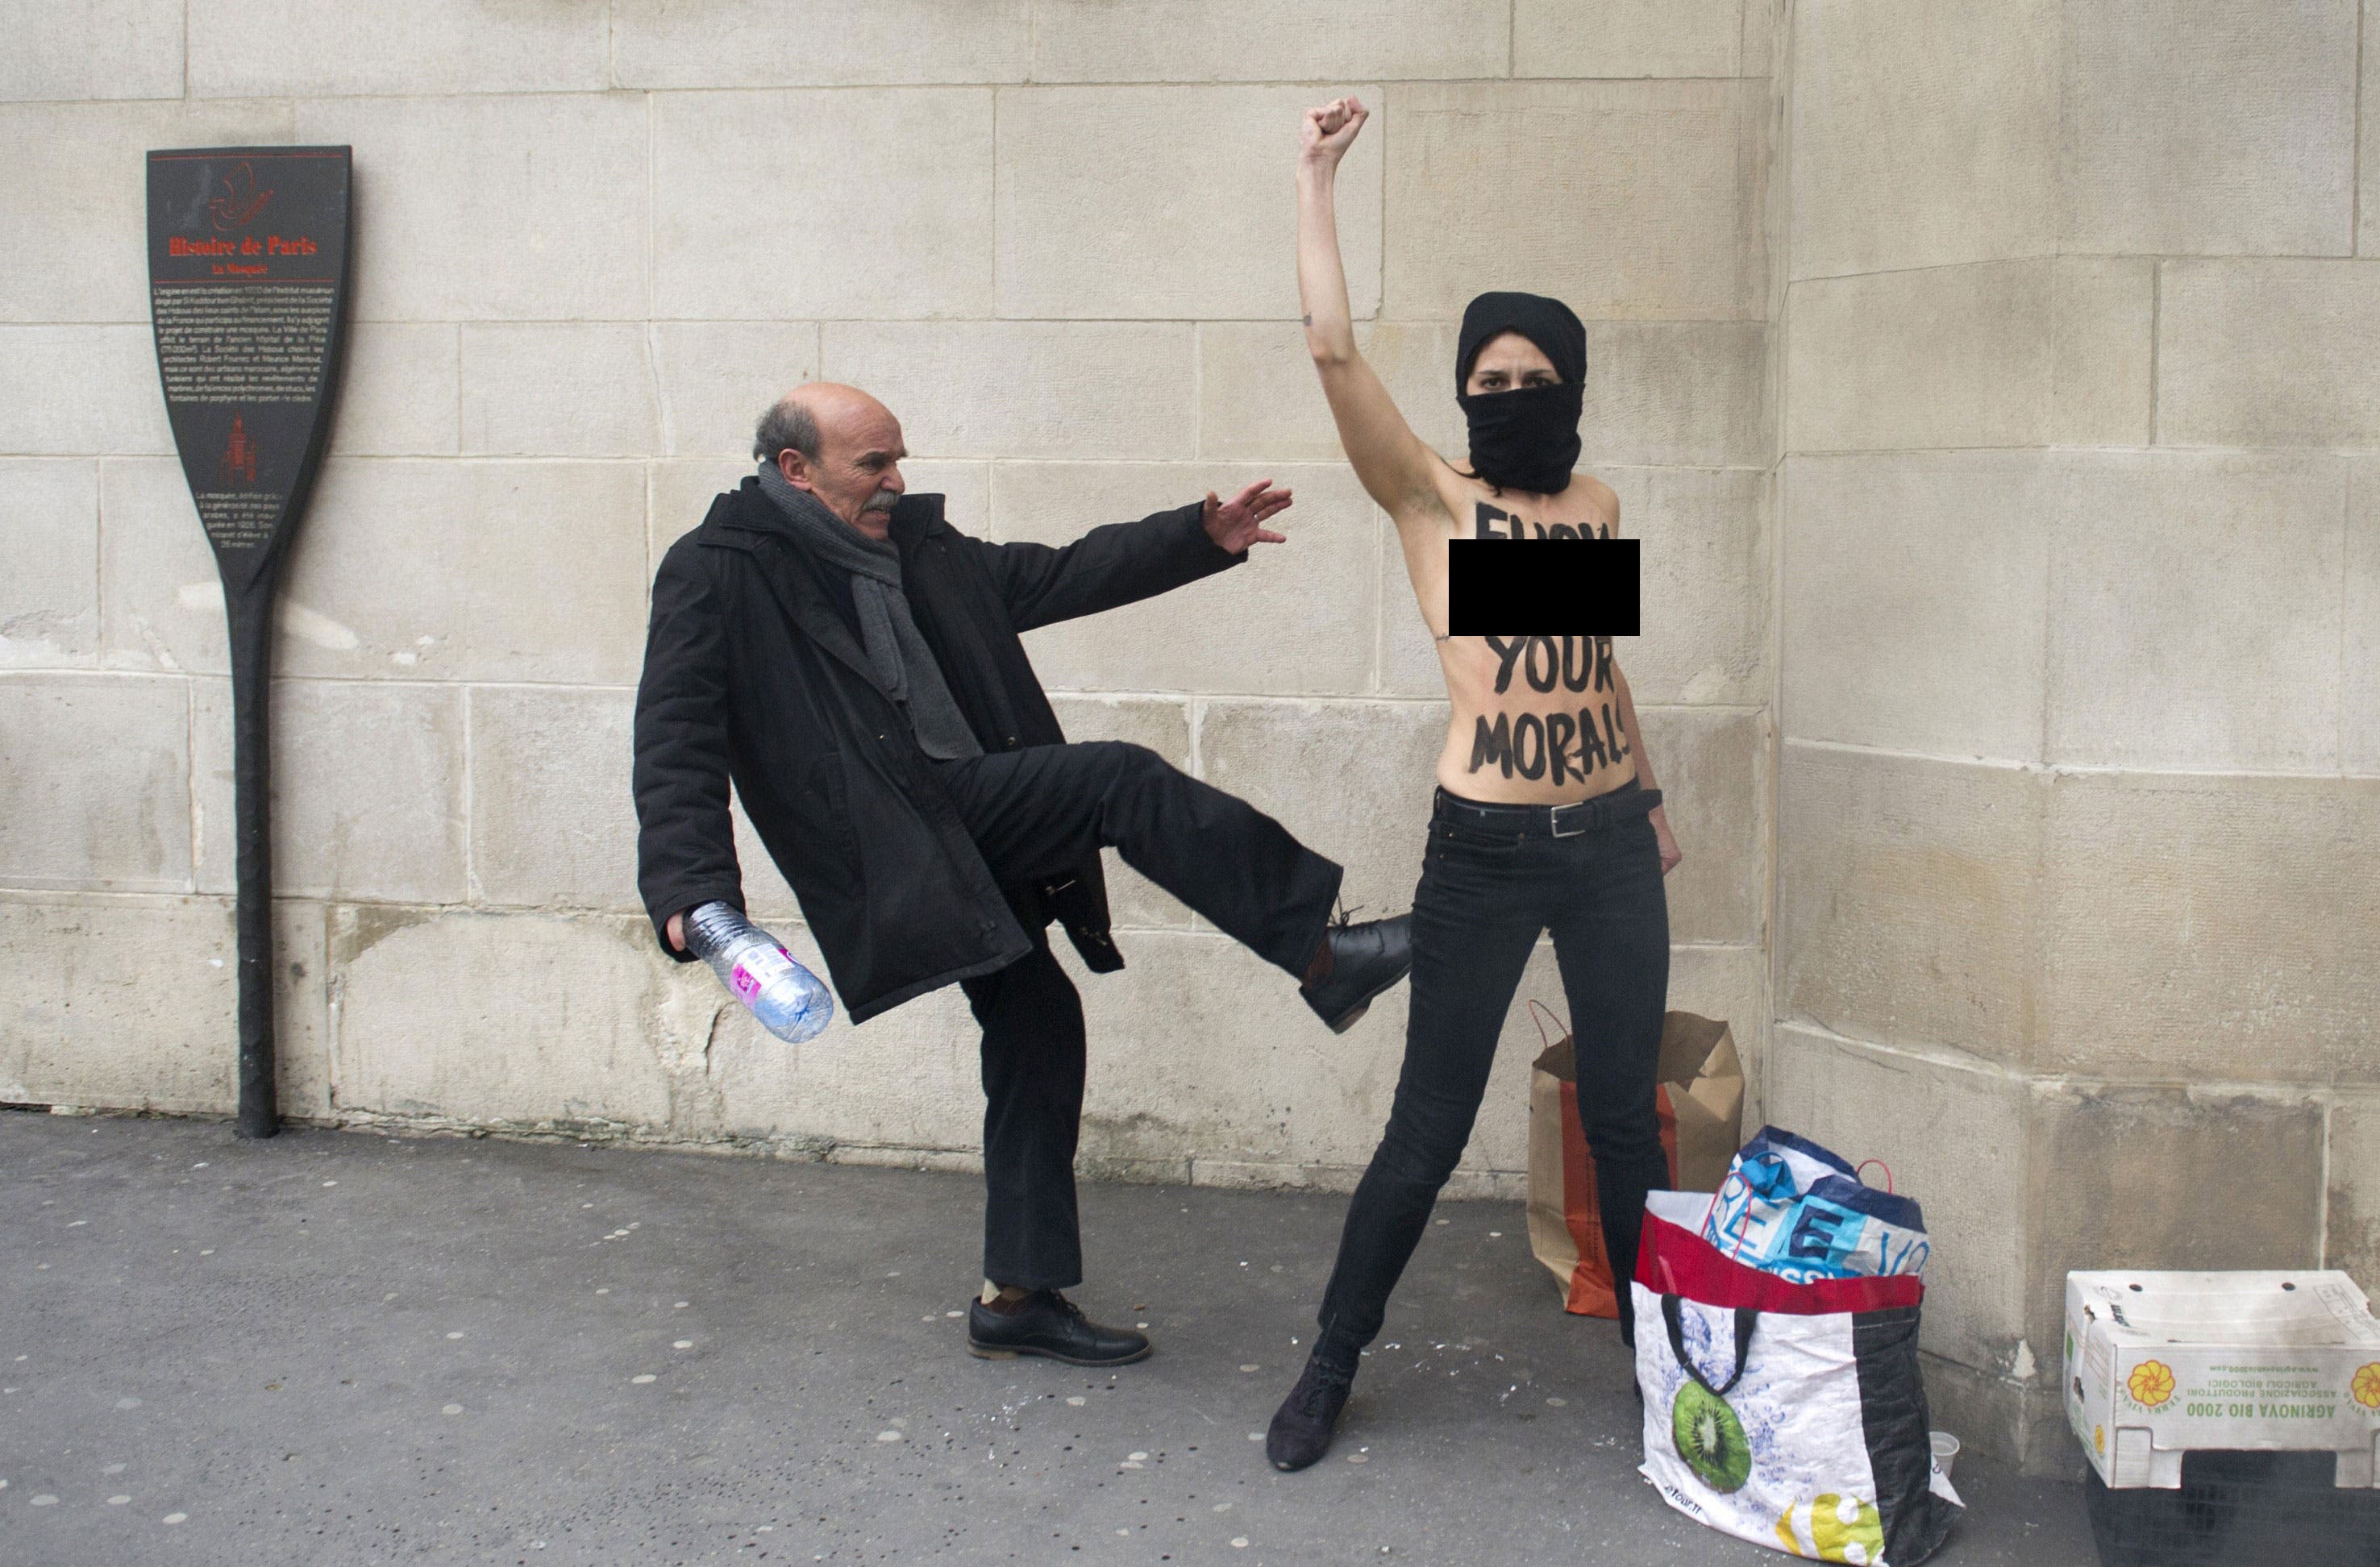 A man kicks a topless activist of the Ukrainian feminist movement Femen as she raises her fist to protest against Islamists in front of the Great Mosque of Paris on April 3, 2013 in Paris. (AFP)